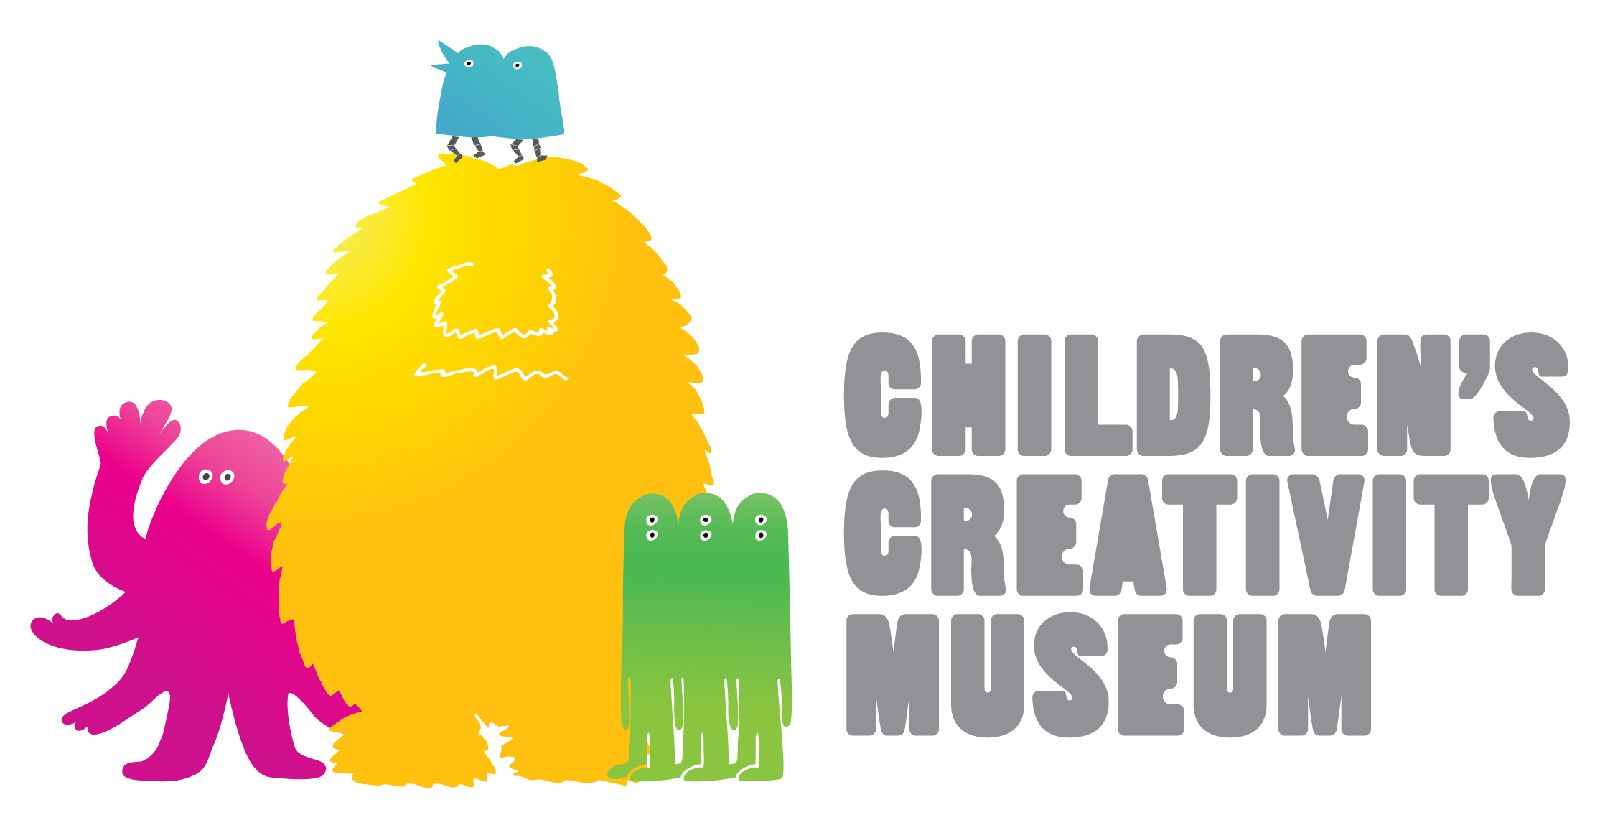 This is an image of the Children's Creativity Museum logo.